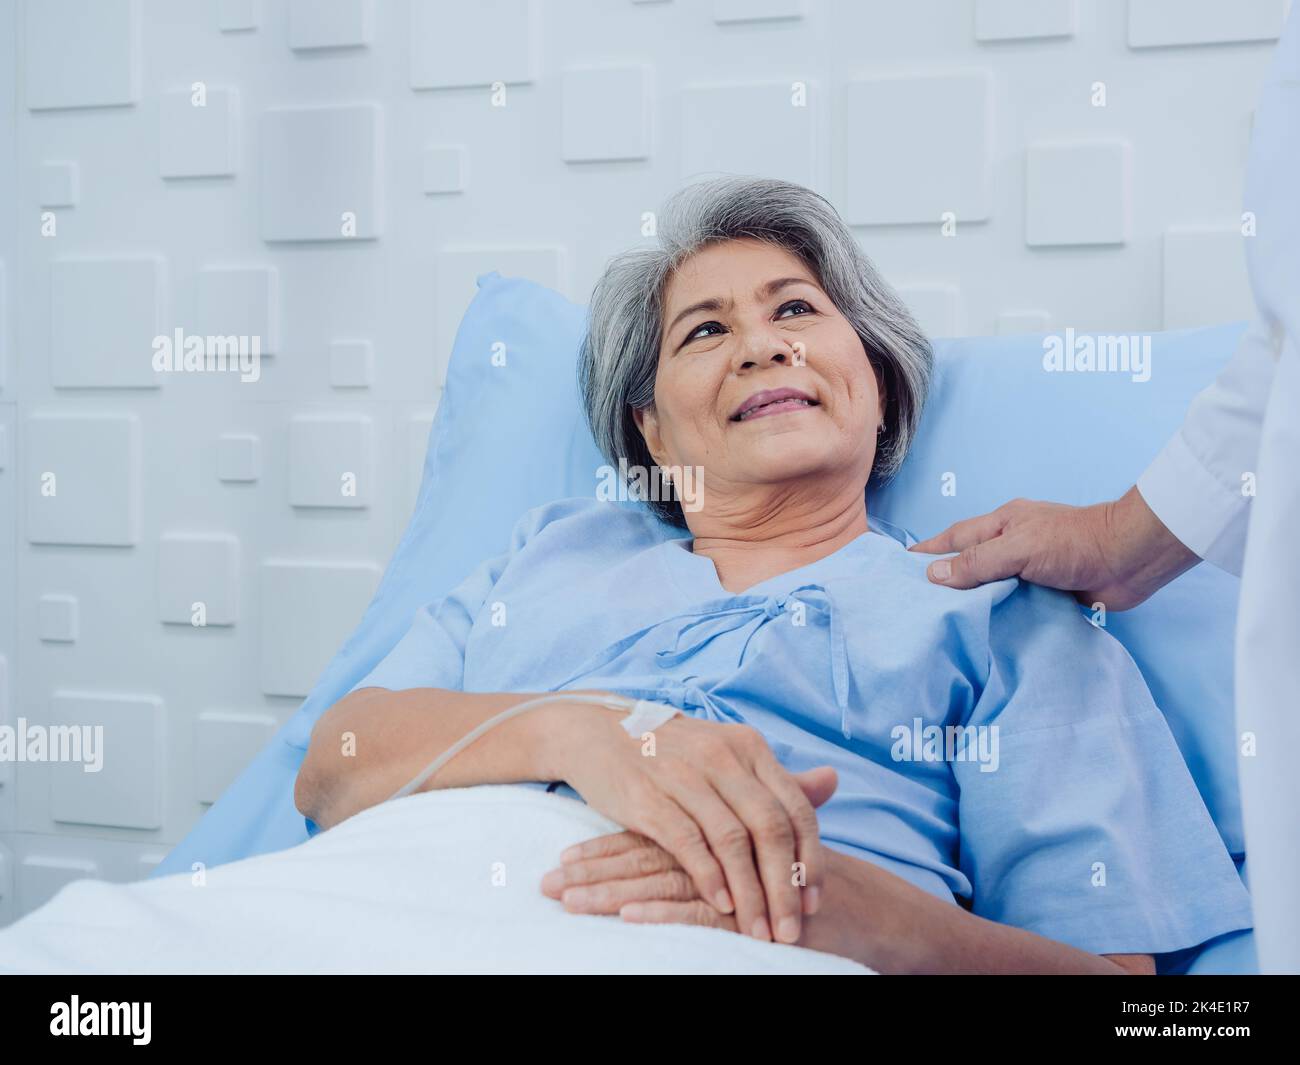 Closeup portrait of smiling Asian elderly, senior woman patient in light blue dress lying on bed while male doctor in white suit touching her shoulder Stock Photo